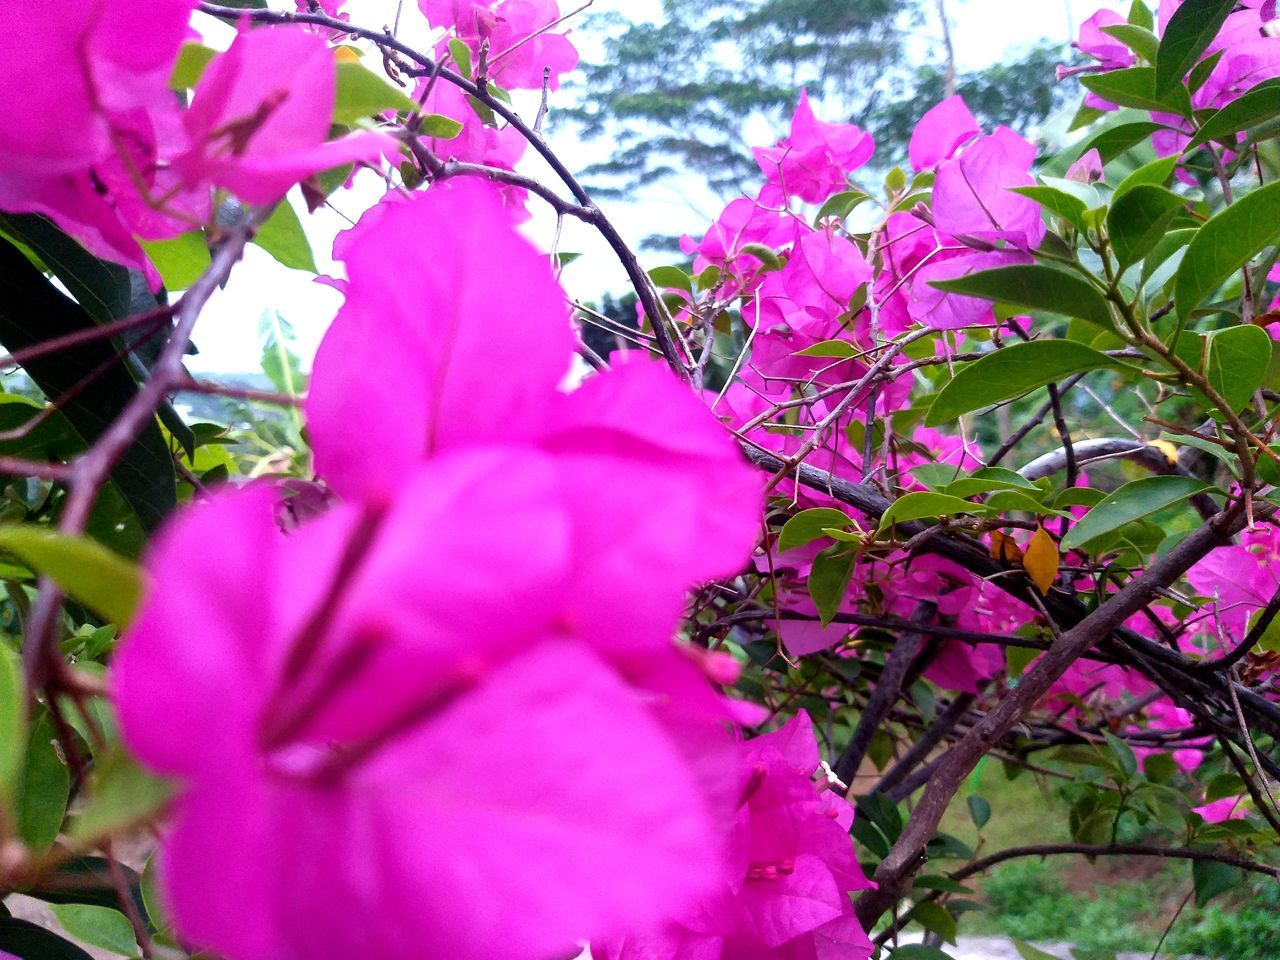 plant, flowering plant, flower, pink, growth, beauty in nature, freshness, blossom, fragility, nature, tree, petal, close-up, no people, day, shrub, branch, springtime, inflorescence, outdoors, low angle view, flower head, bougainvillea, botany, plant part, leaf, selective focus, purple